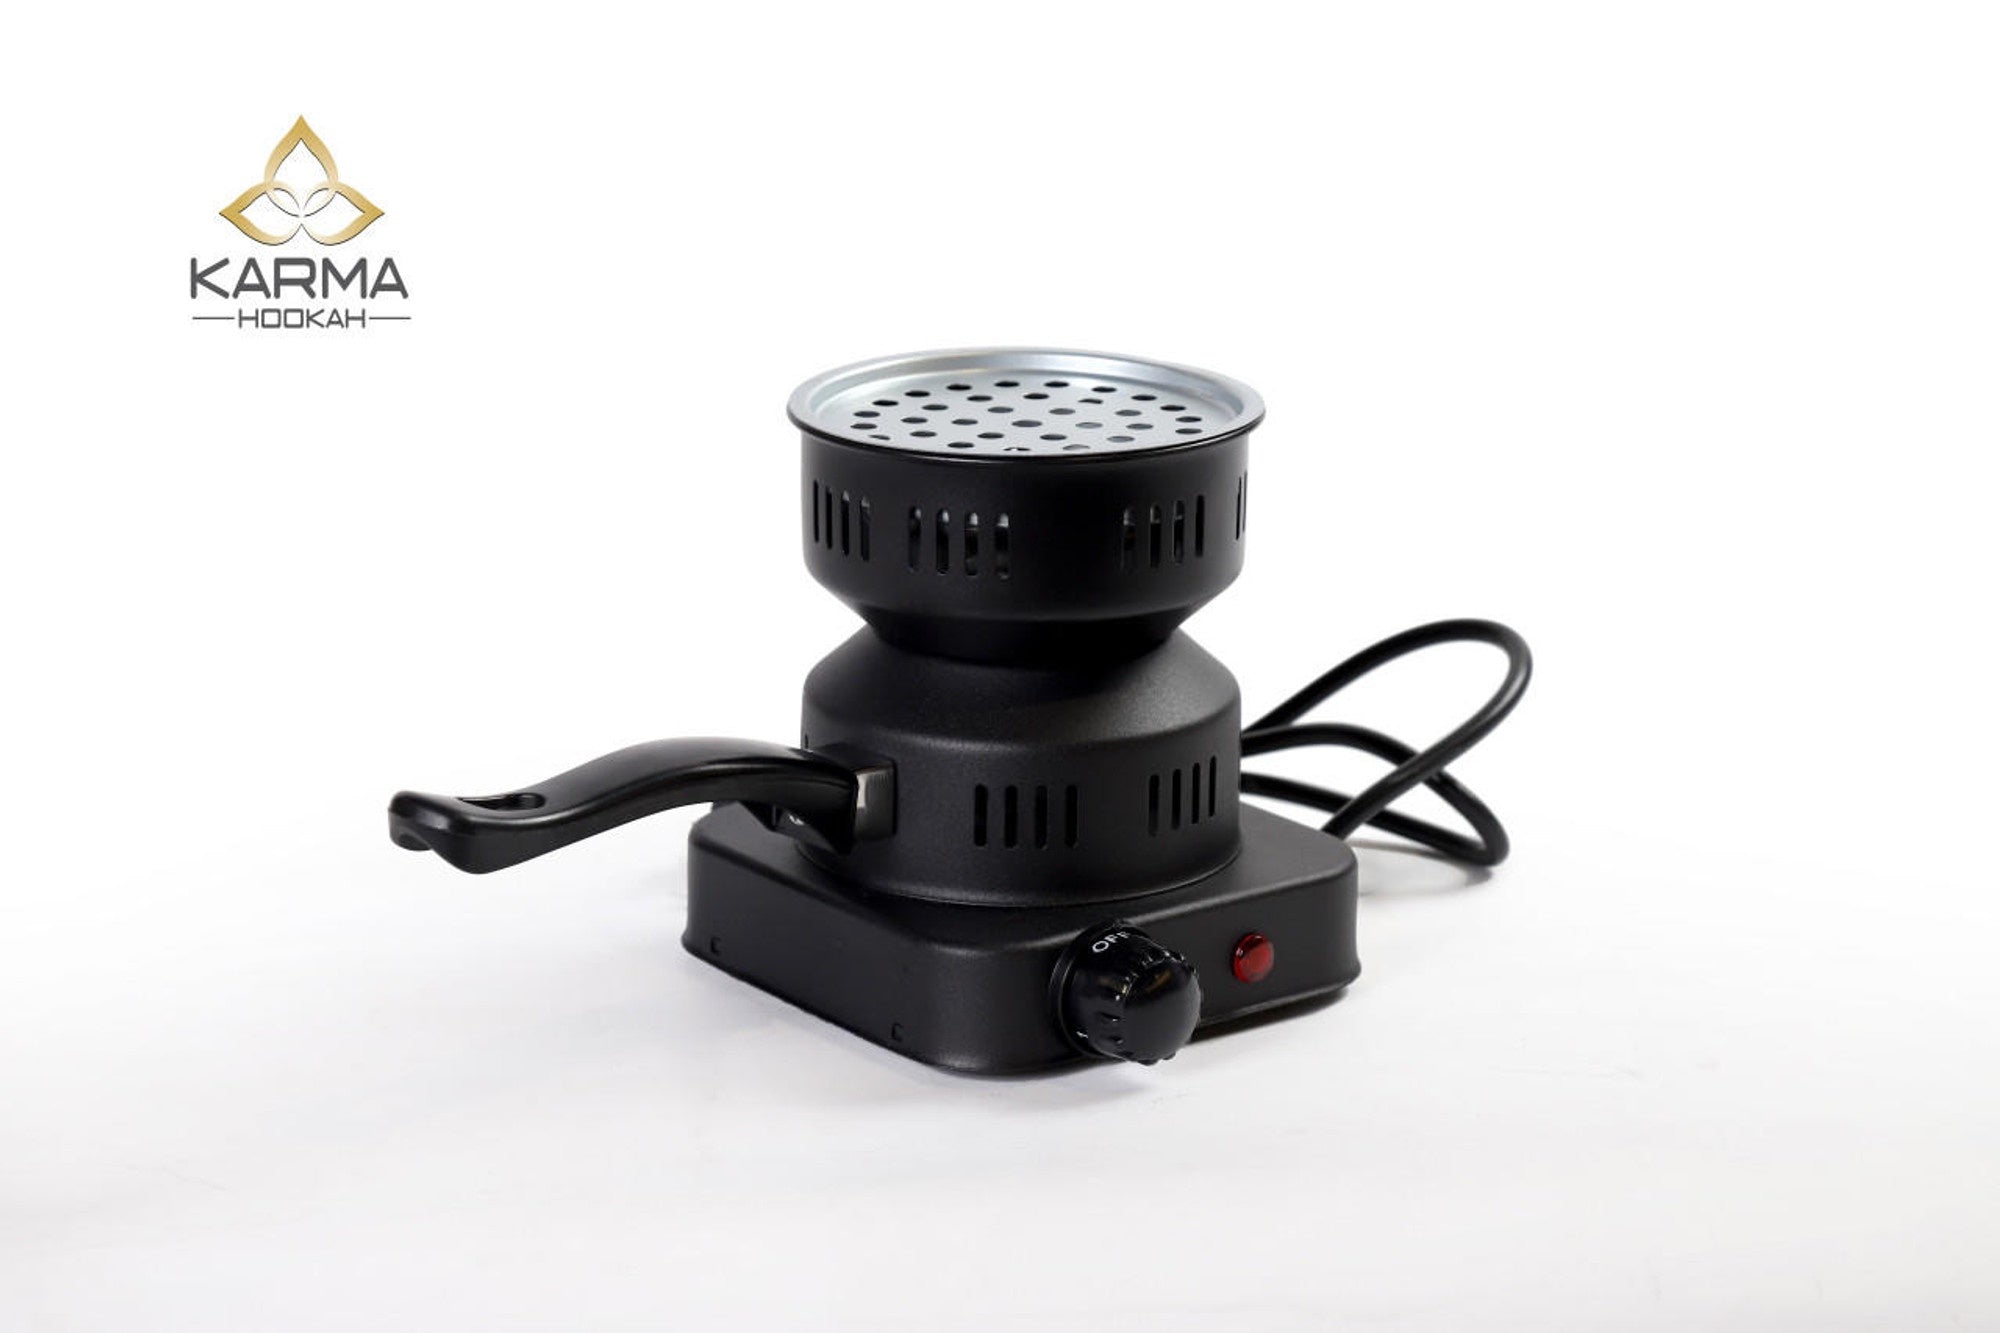 KARMA 1000W Hot Plate Electric Hookah Coil Burner With Handle